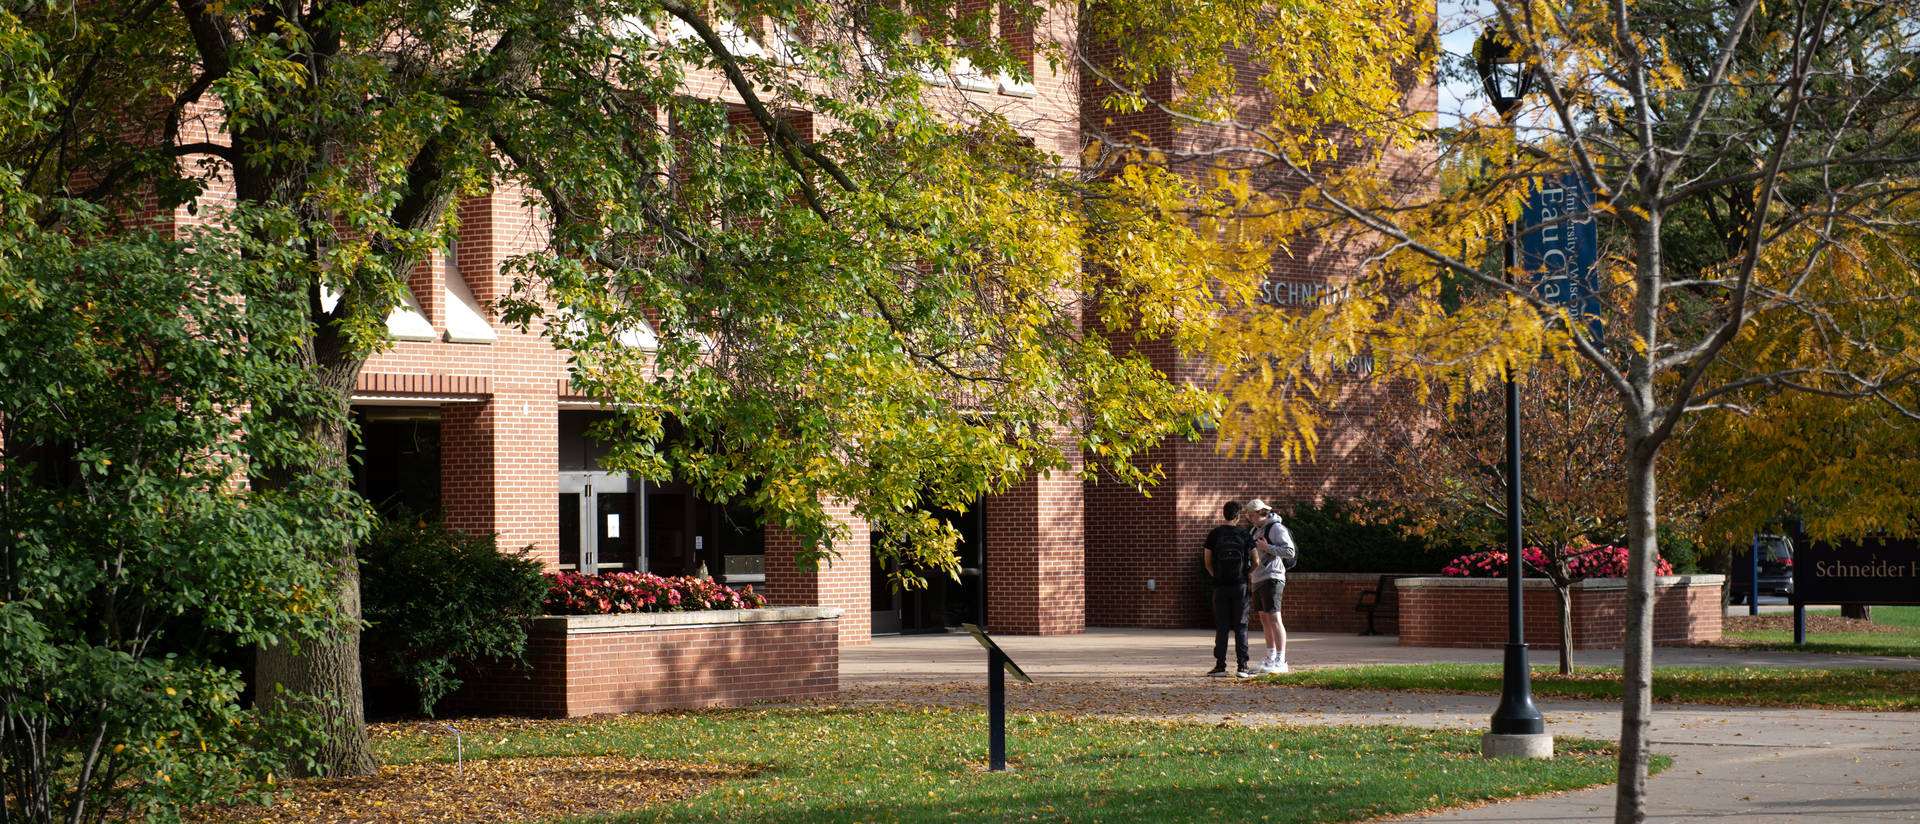 Schneider Hall during the Fall Colors